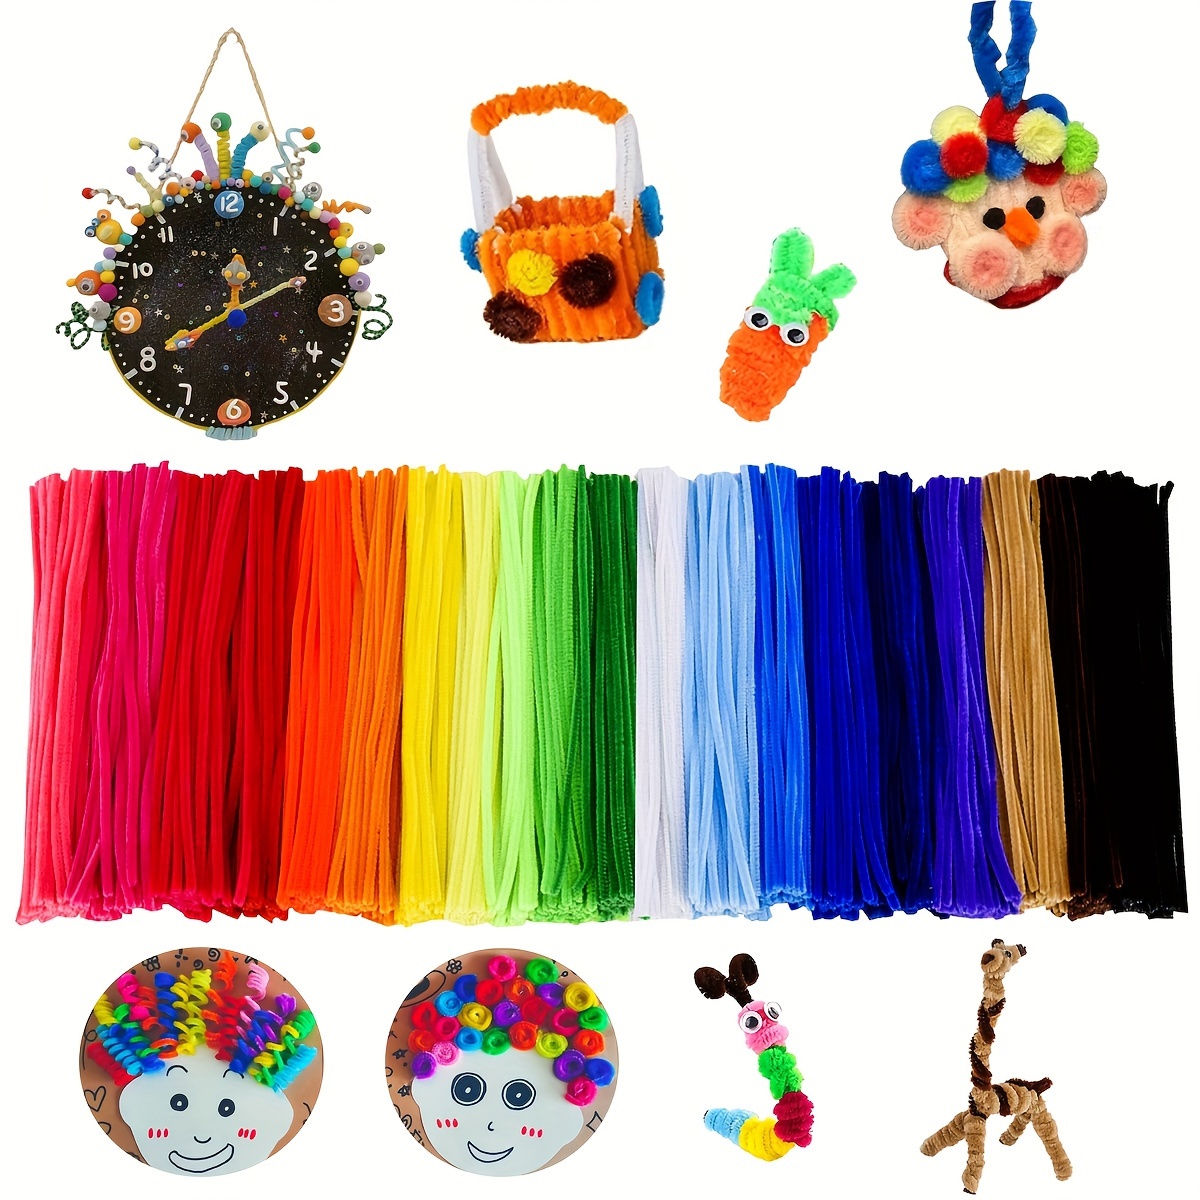 Bulk Chenille Stems Plush Wire Toys Colorful Pipe Cleaners Craft Kit  Flexible Wire Stems for Kids' Diy Art Projects Handicraft - AliExpress